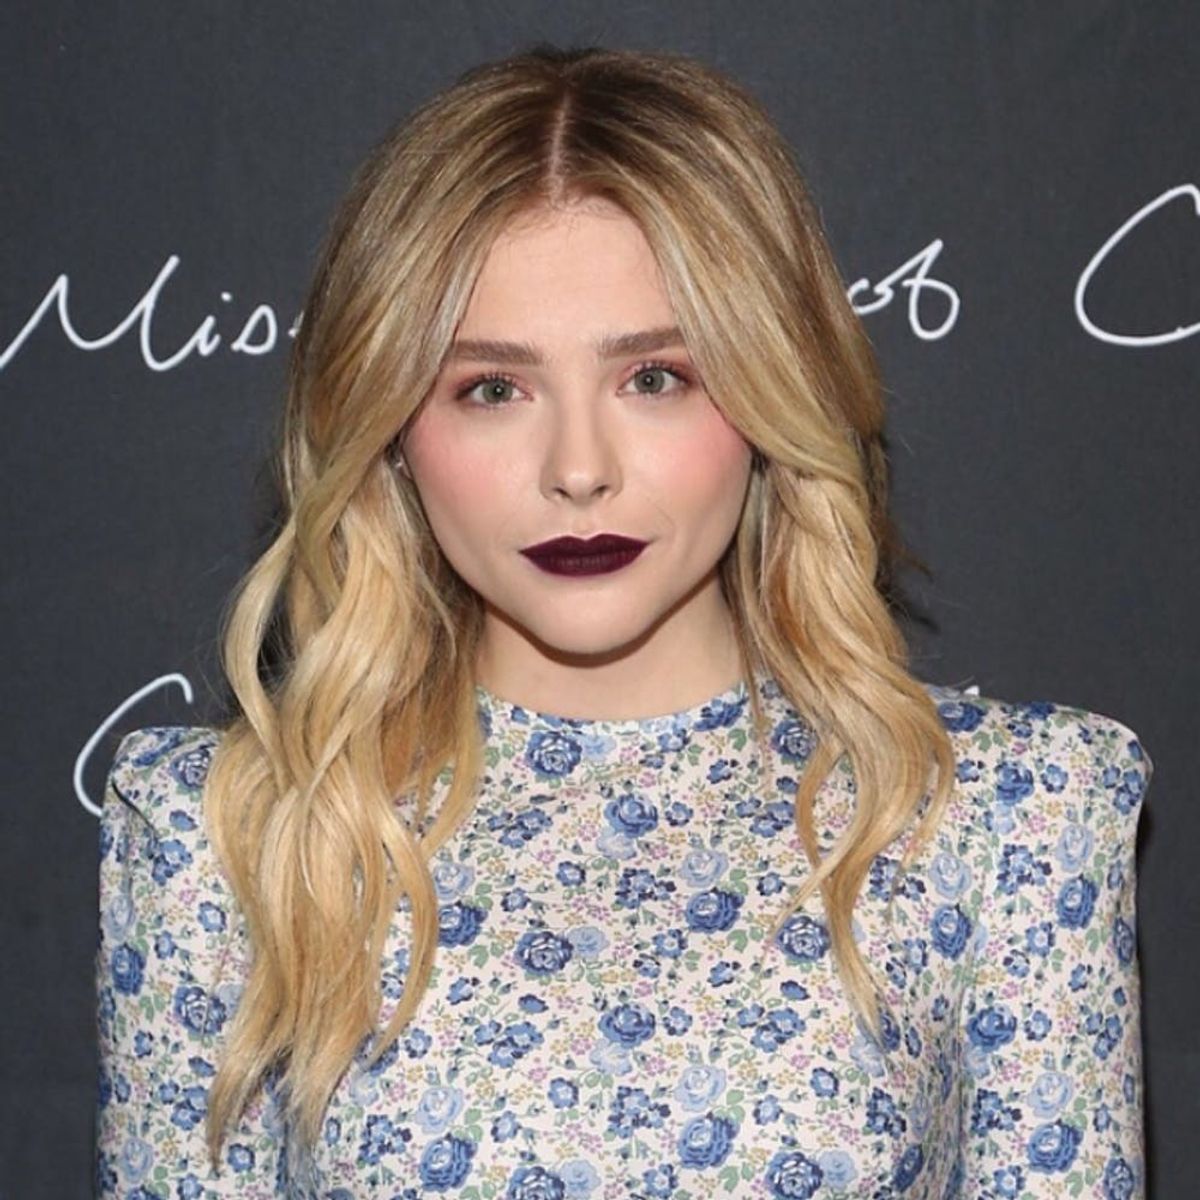 Chloë Grace Moretz’s Beauty Look Just Took a Seriously Dark Turn… and We Love It